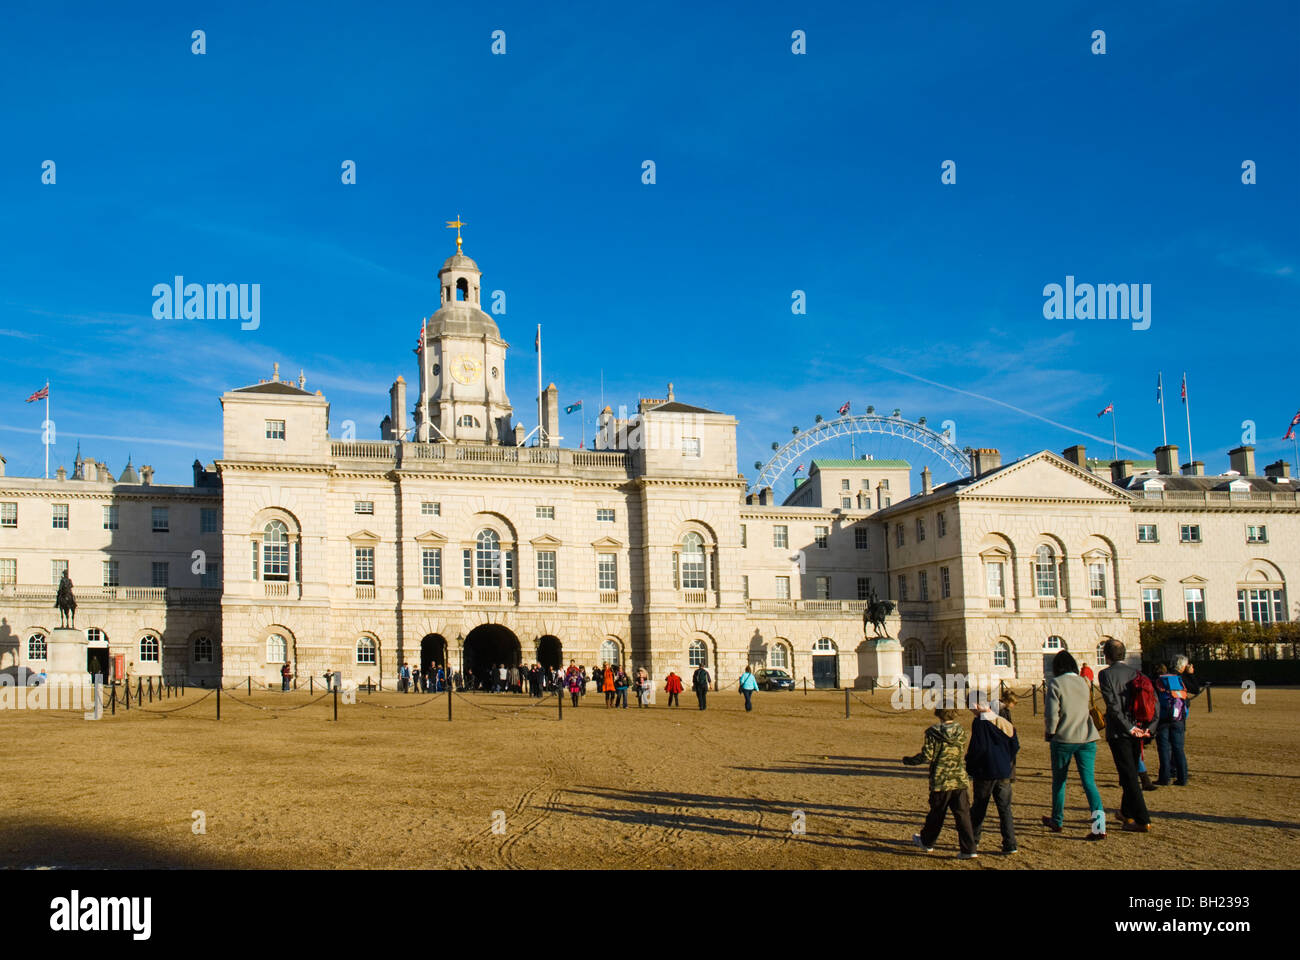 Old Admiralty Buildings Parade Grounds city of Westminster central London England UK Stock Photo